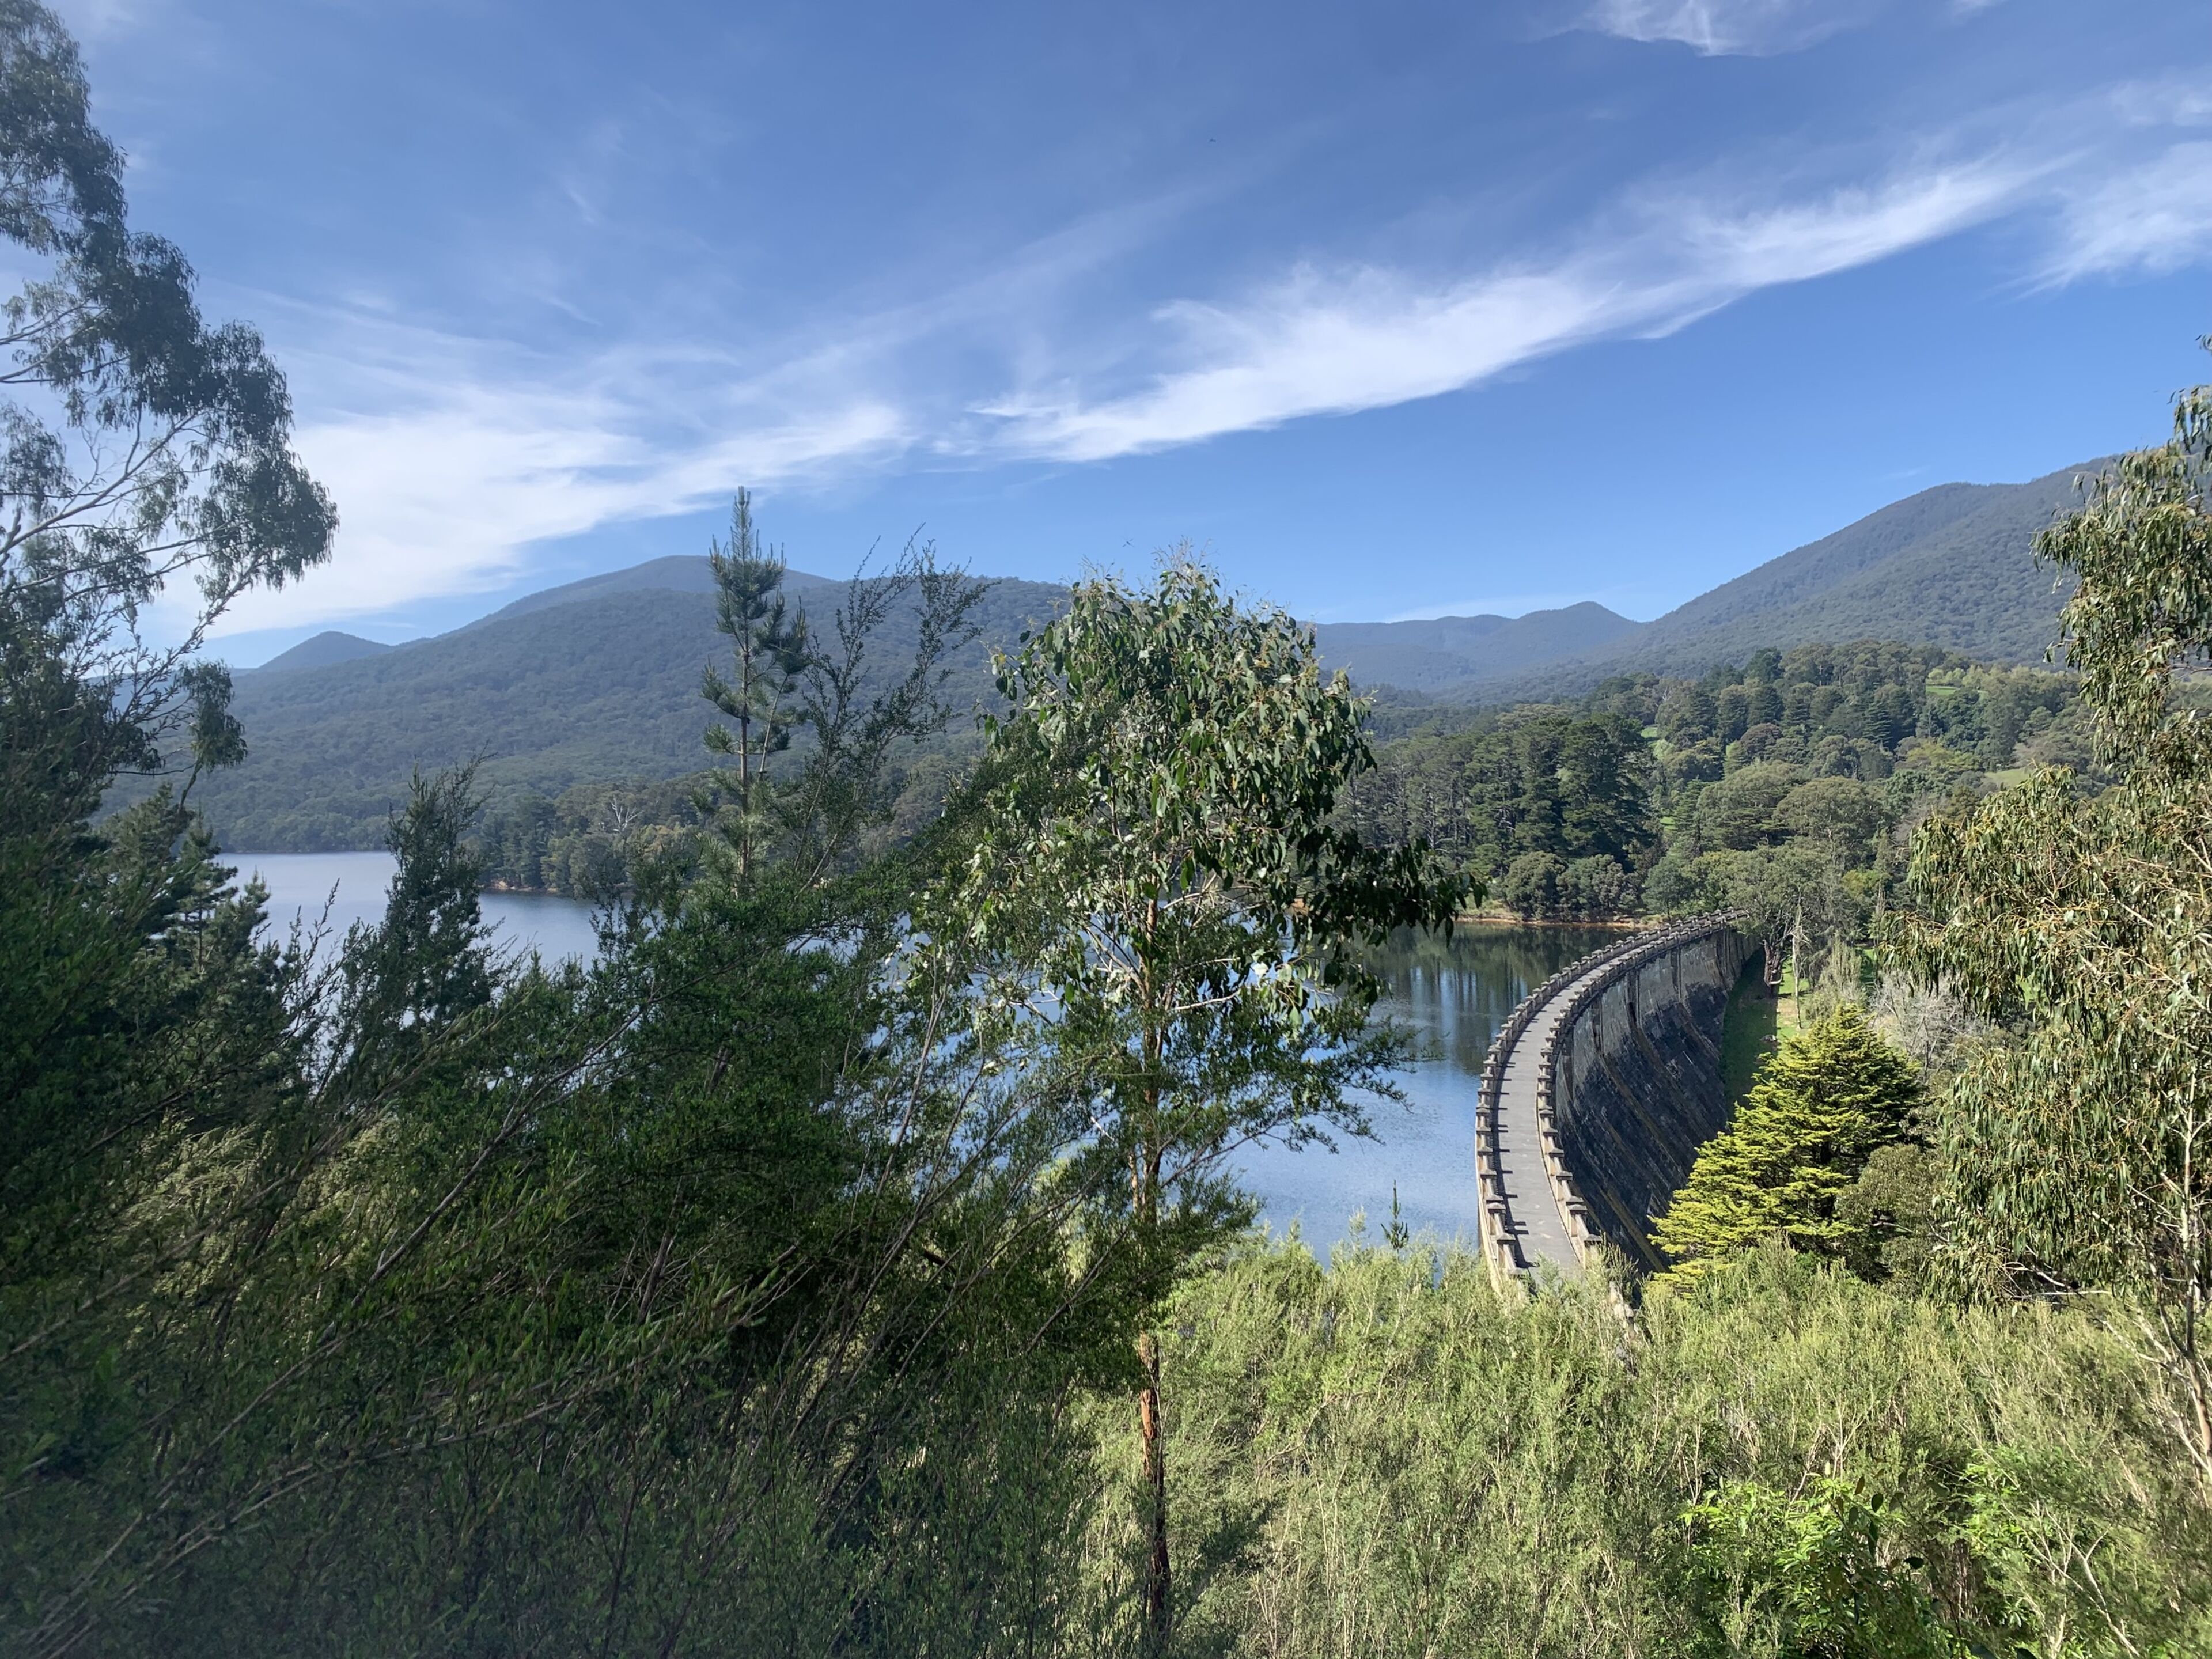 A lush vista overlooking a dam, where a forest meets calm waters, nestled in the mountain's shadow.